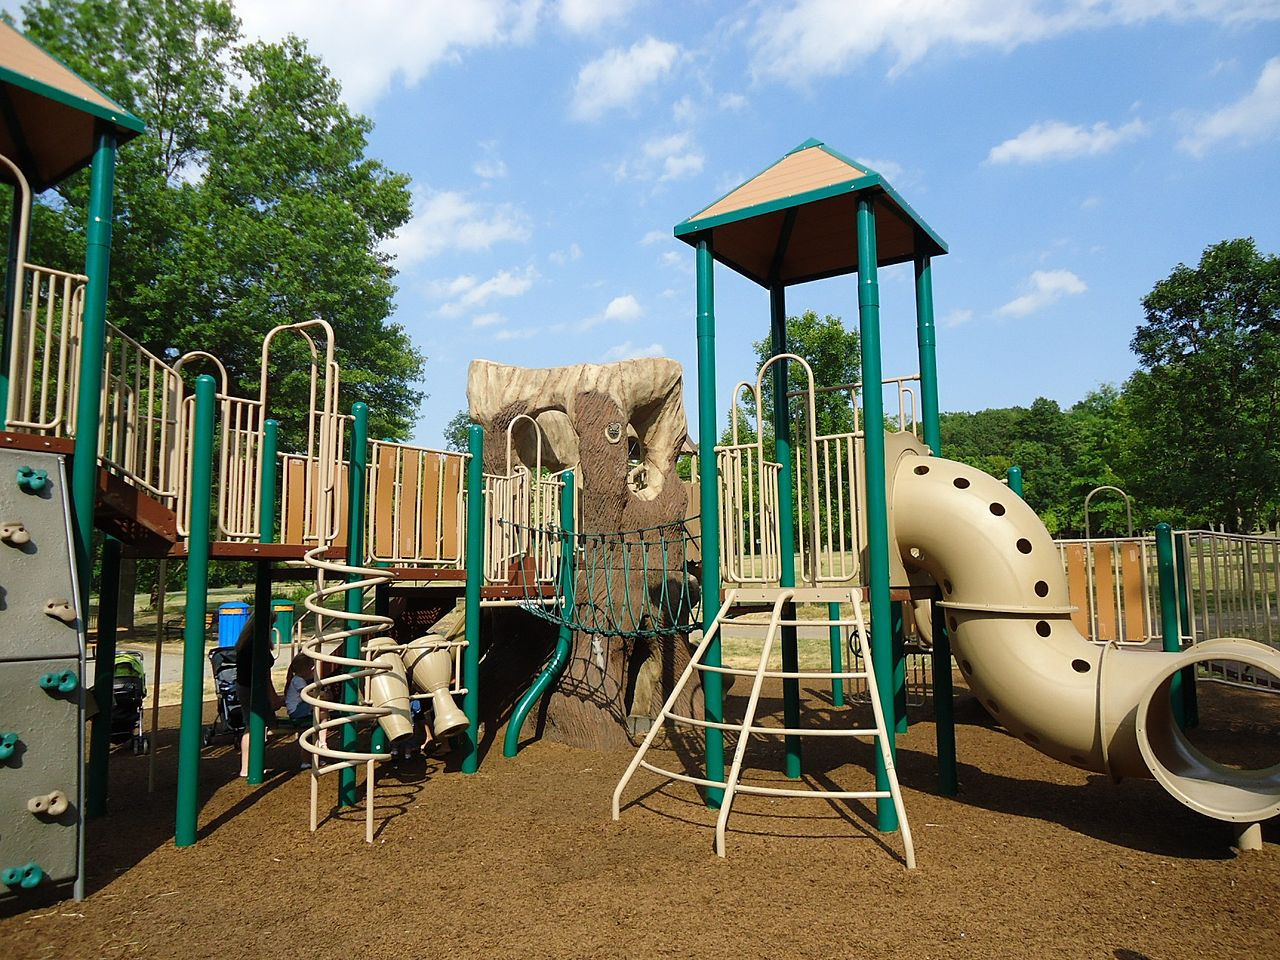 Outdoor Playground For Kids
 File Childrens outdoor play equipment in park